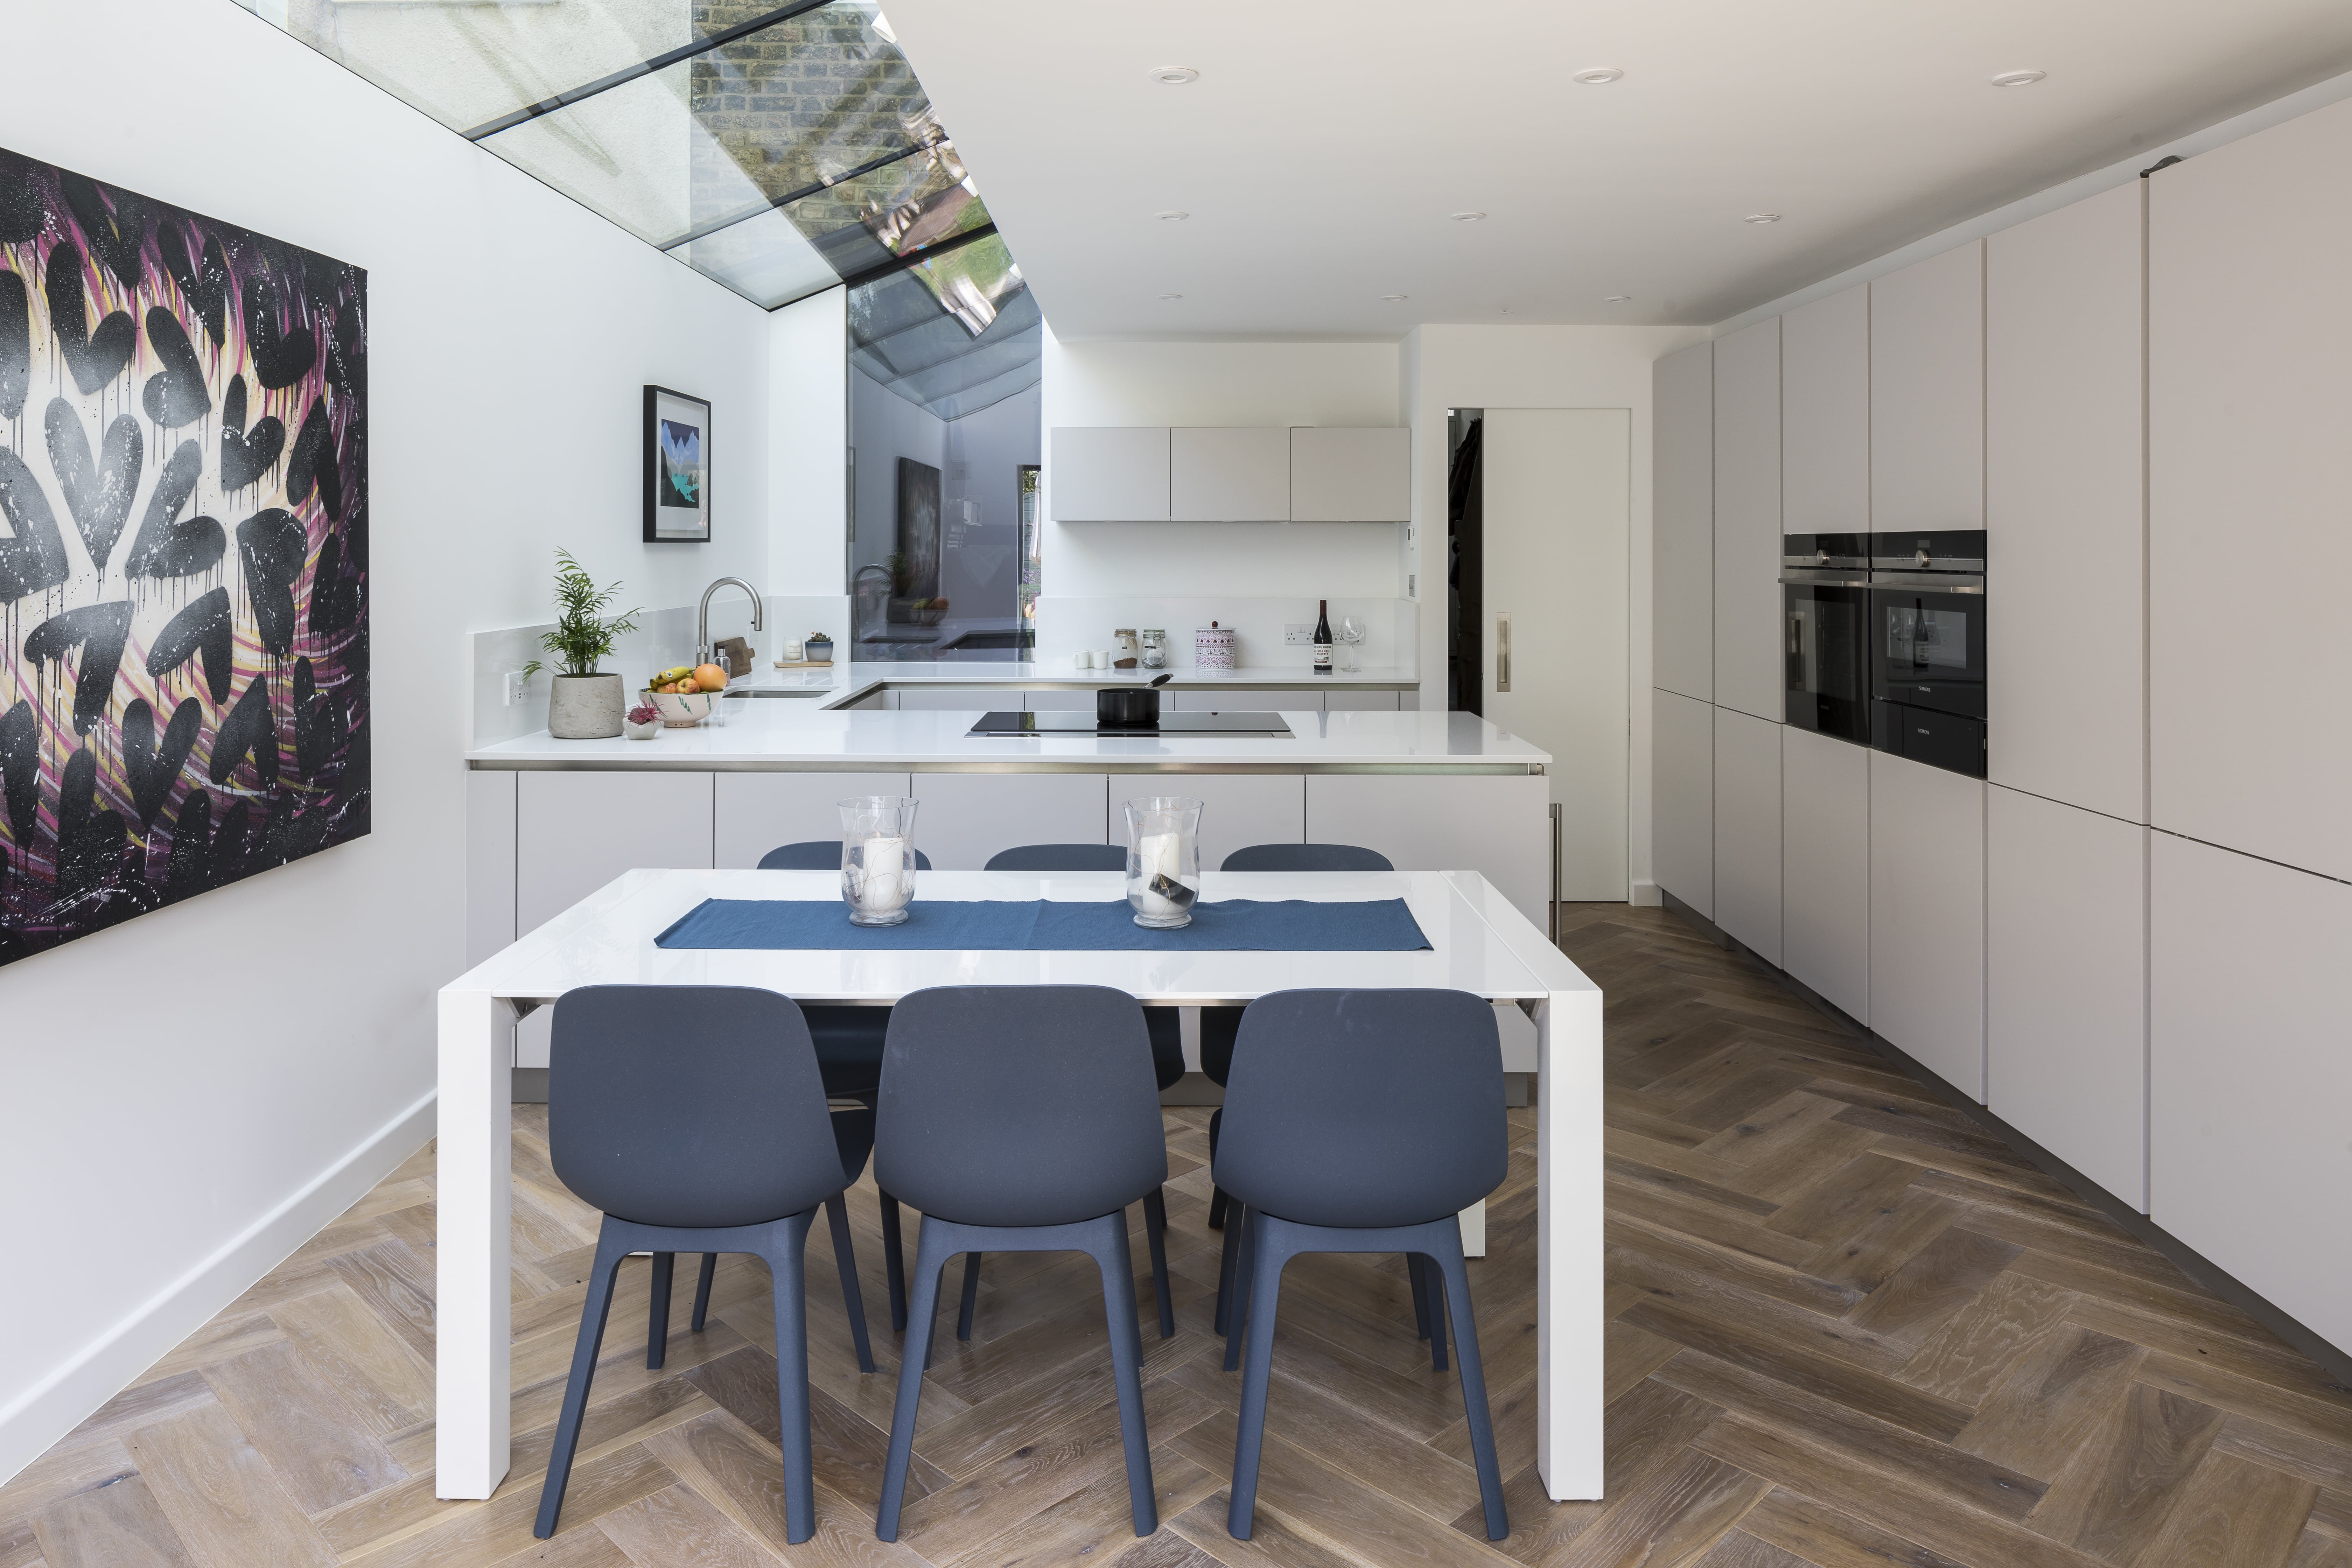 </p> <p>Find your ideal home design pro on designfor-me.com - get matched and see who's interested in your home project. Click image to see more inspiration from our design pros</p> <p>Design by Richard, architect from Lambeth, London</p> <p>#architecture #homedesign #modernhomes #homeinspiration #kitchens #kitchendesign #kitcheninspiration #kitchenideas #kitchengoals #skylights #rooflights </p> <p>